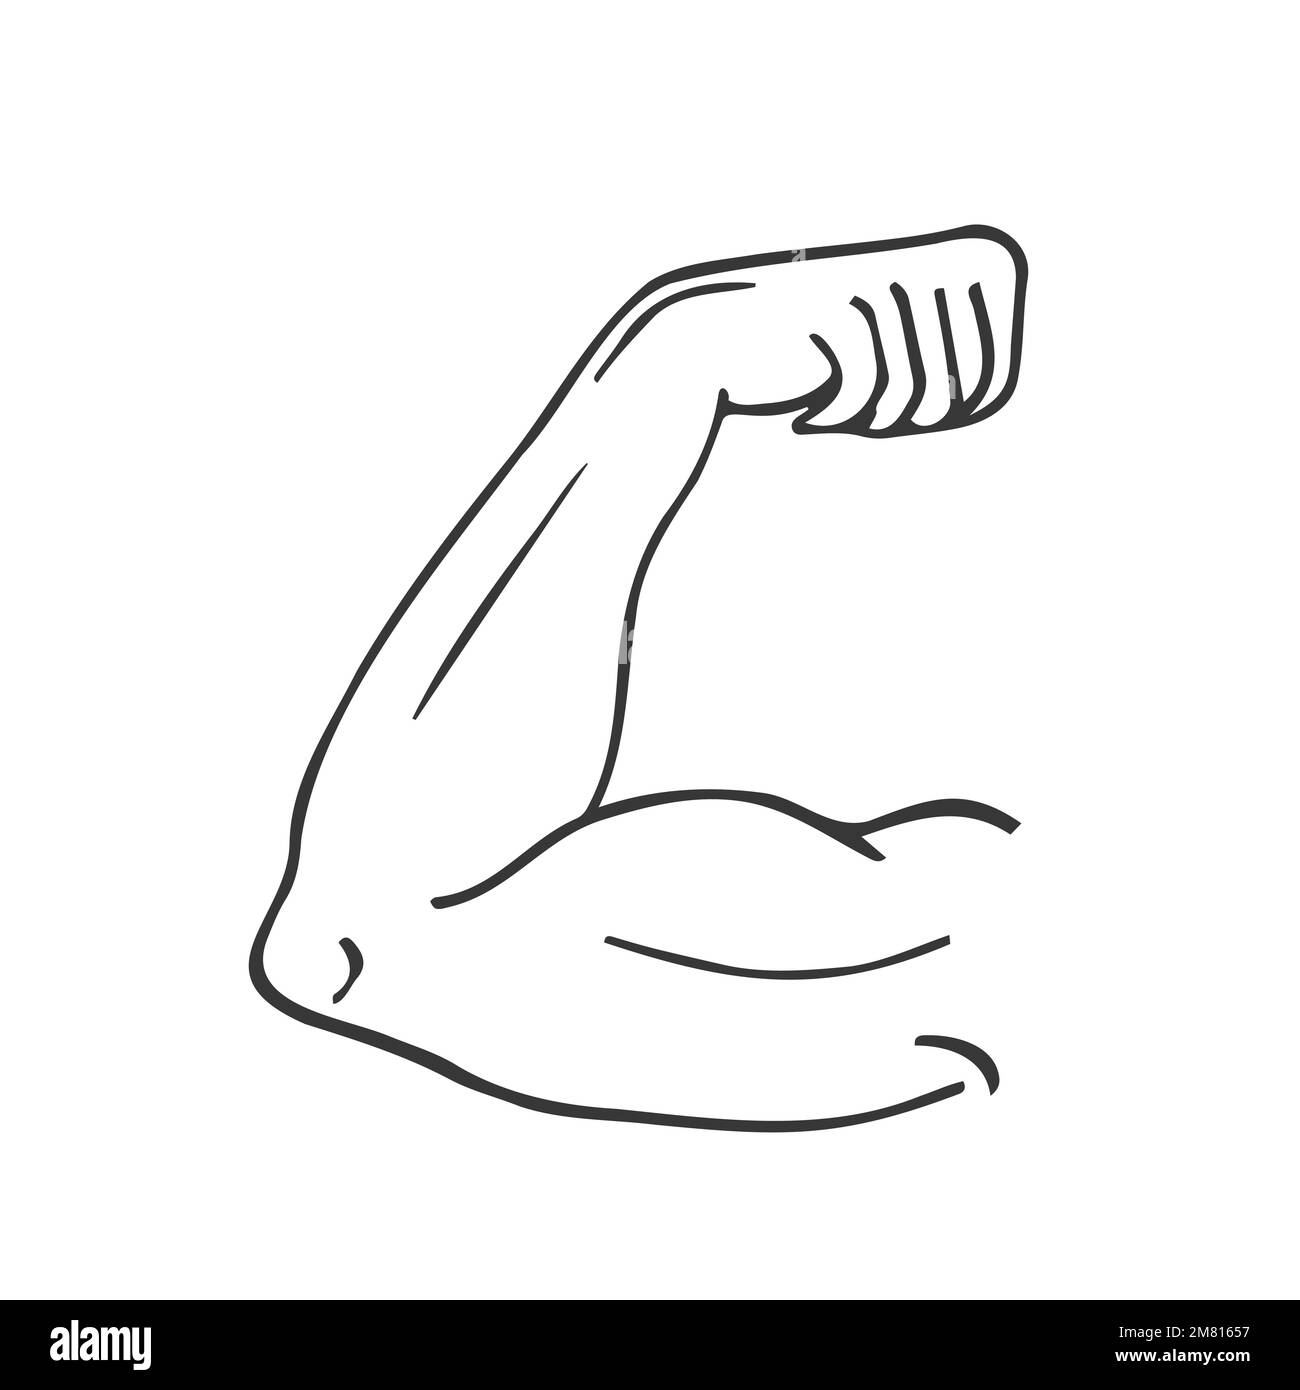 https://c8.alamy.com/comp/2M81657/handdrawn-strong-arm-doodle-icon-hand-drawn-black-sketch-sign-symbol-decoration-element-white-background-isolated-flat-design-2M81657.jpg